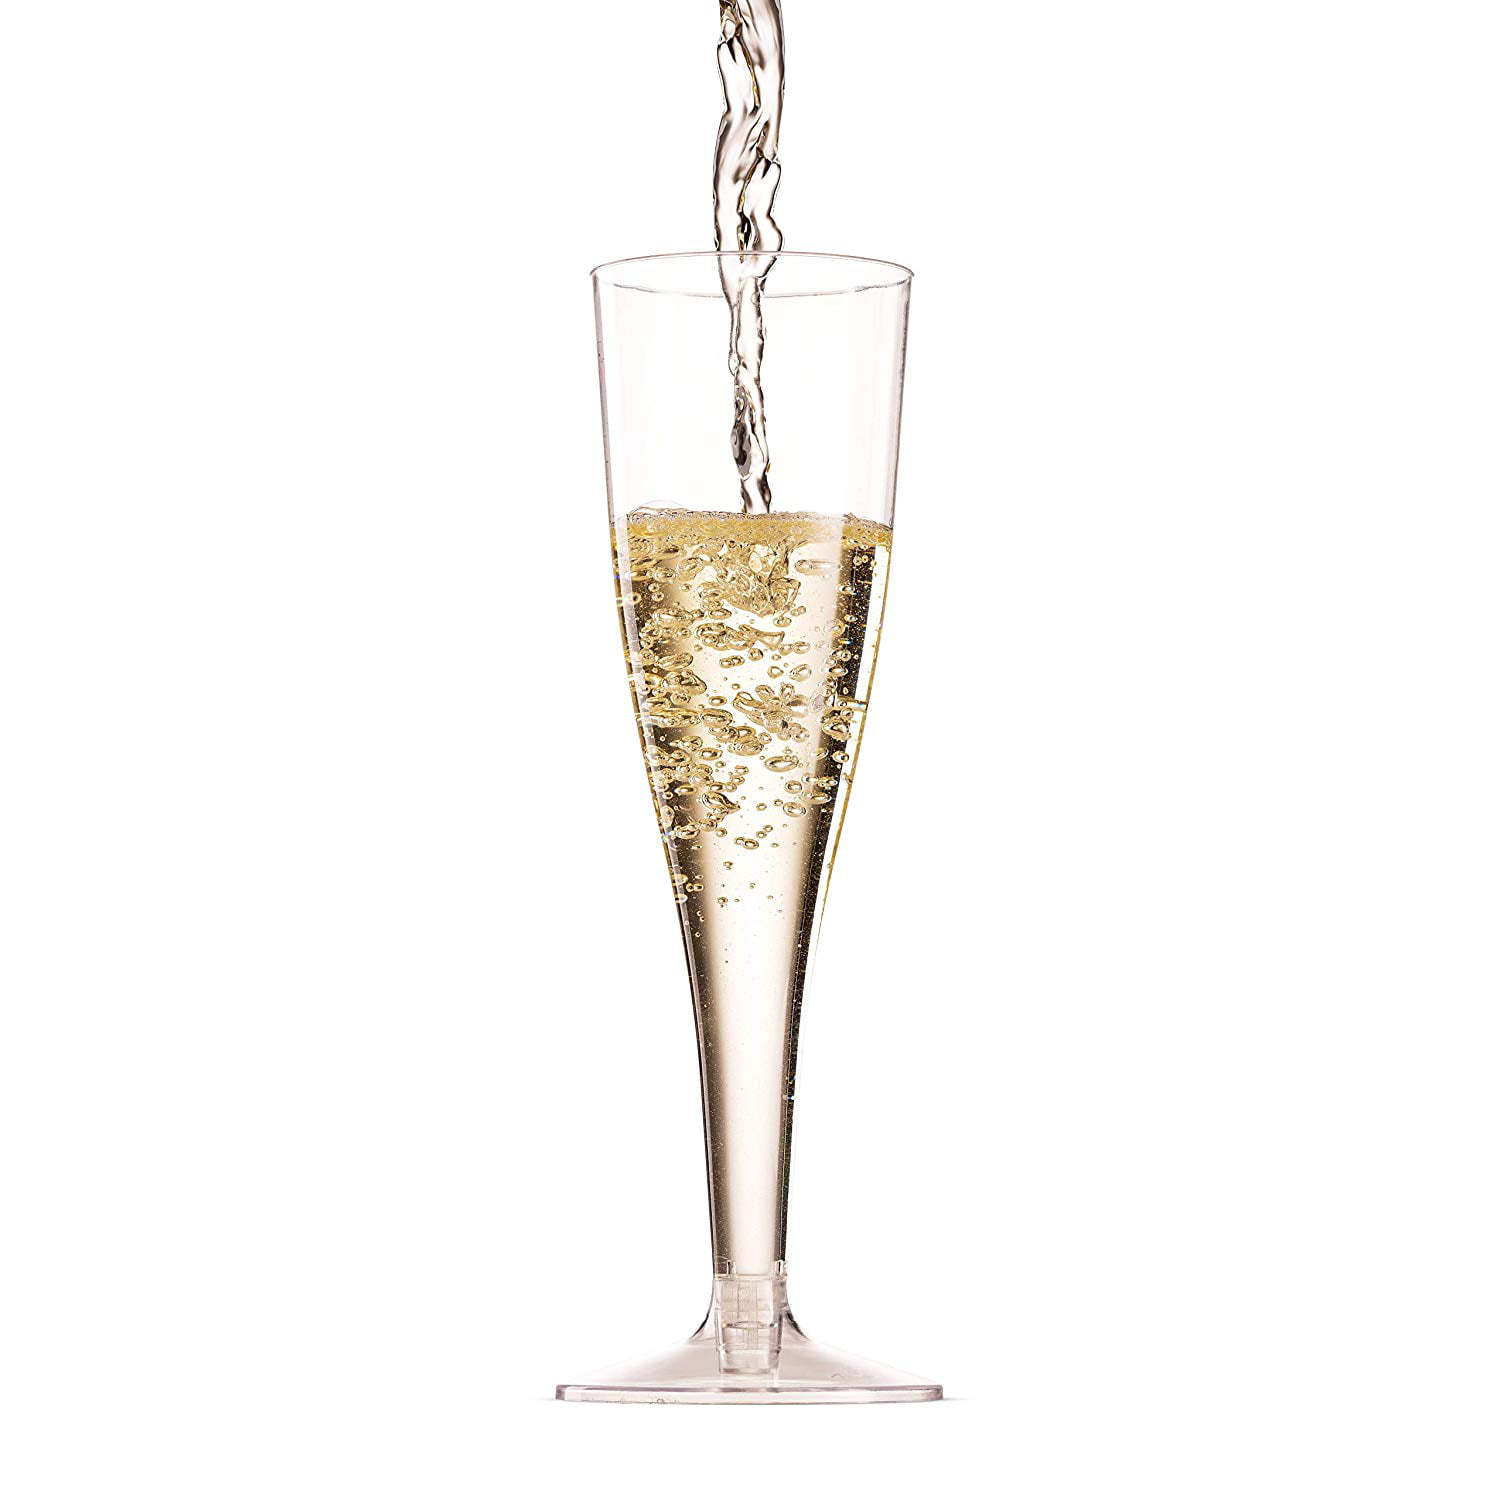 100 Pack Plastic Champagne Flutes, 5 Oz Clear Plastic Toasting Glasses,  Disposable Wedding Party Cocktail Cups 